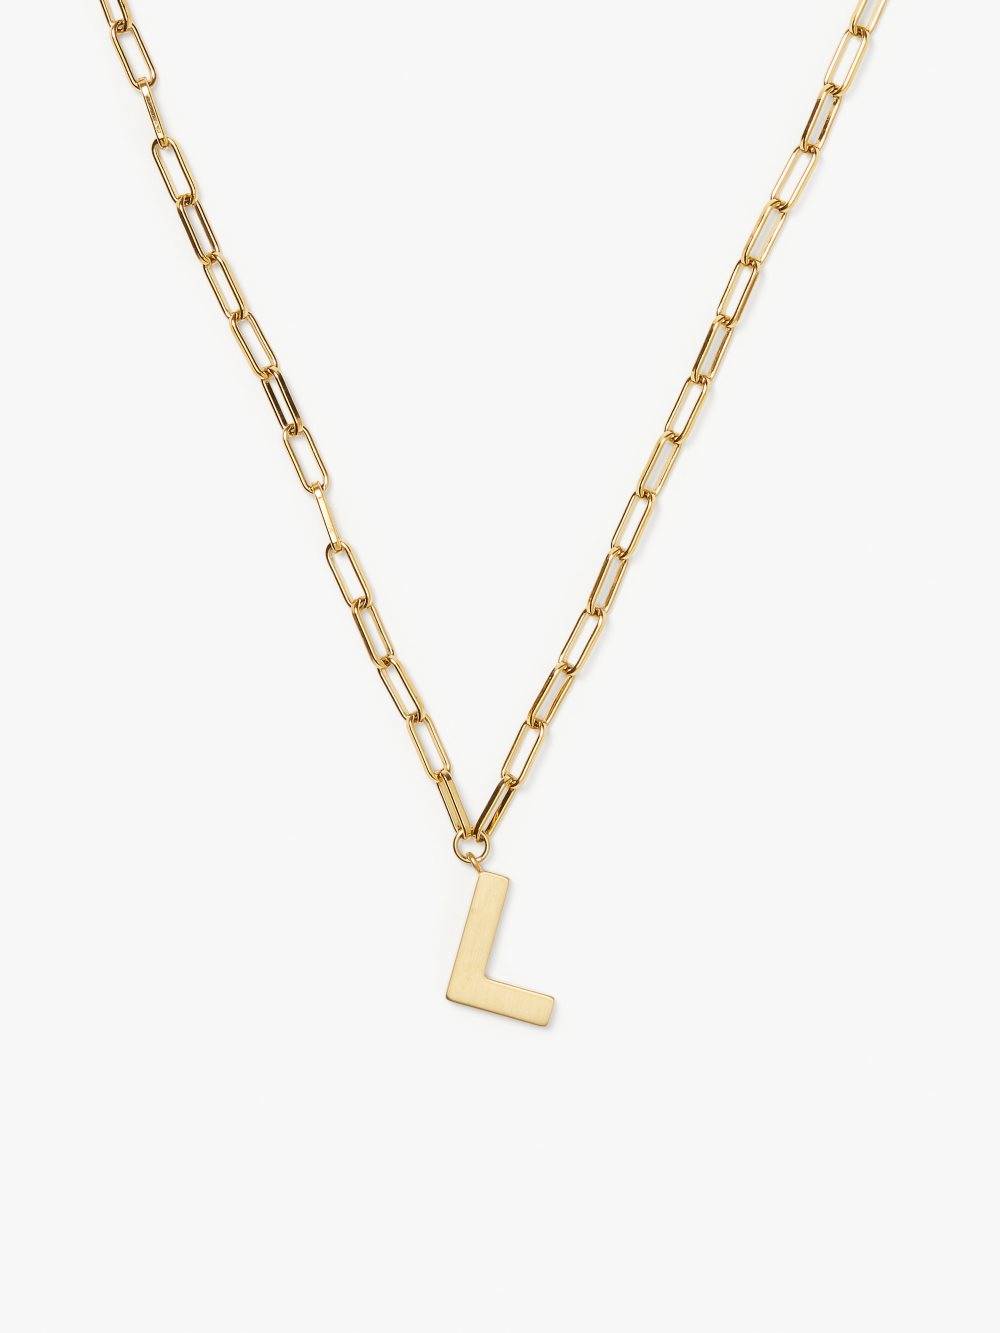 Women's gold. l initial this pendant | Kate Spade